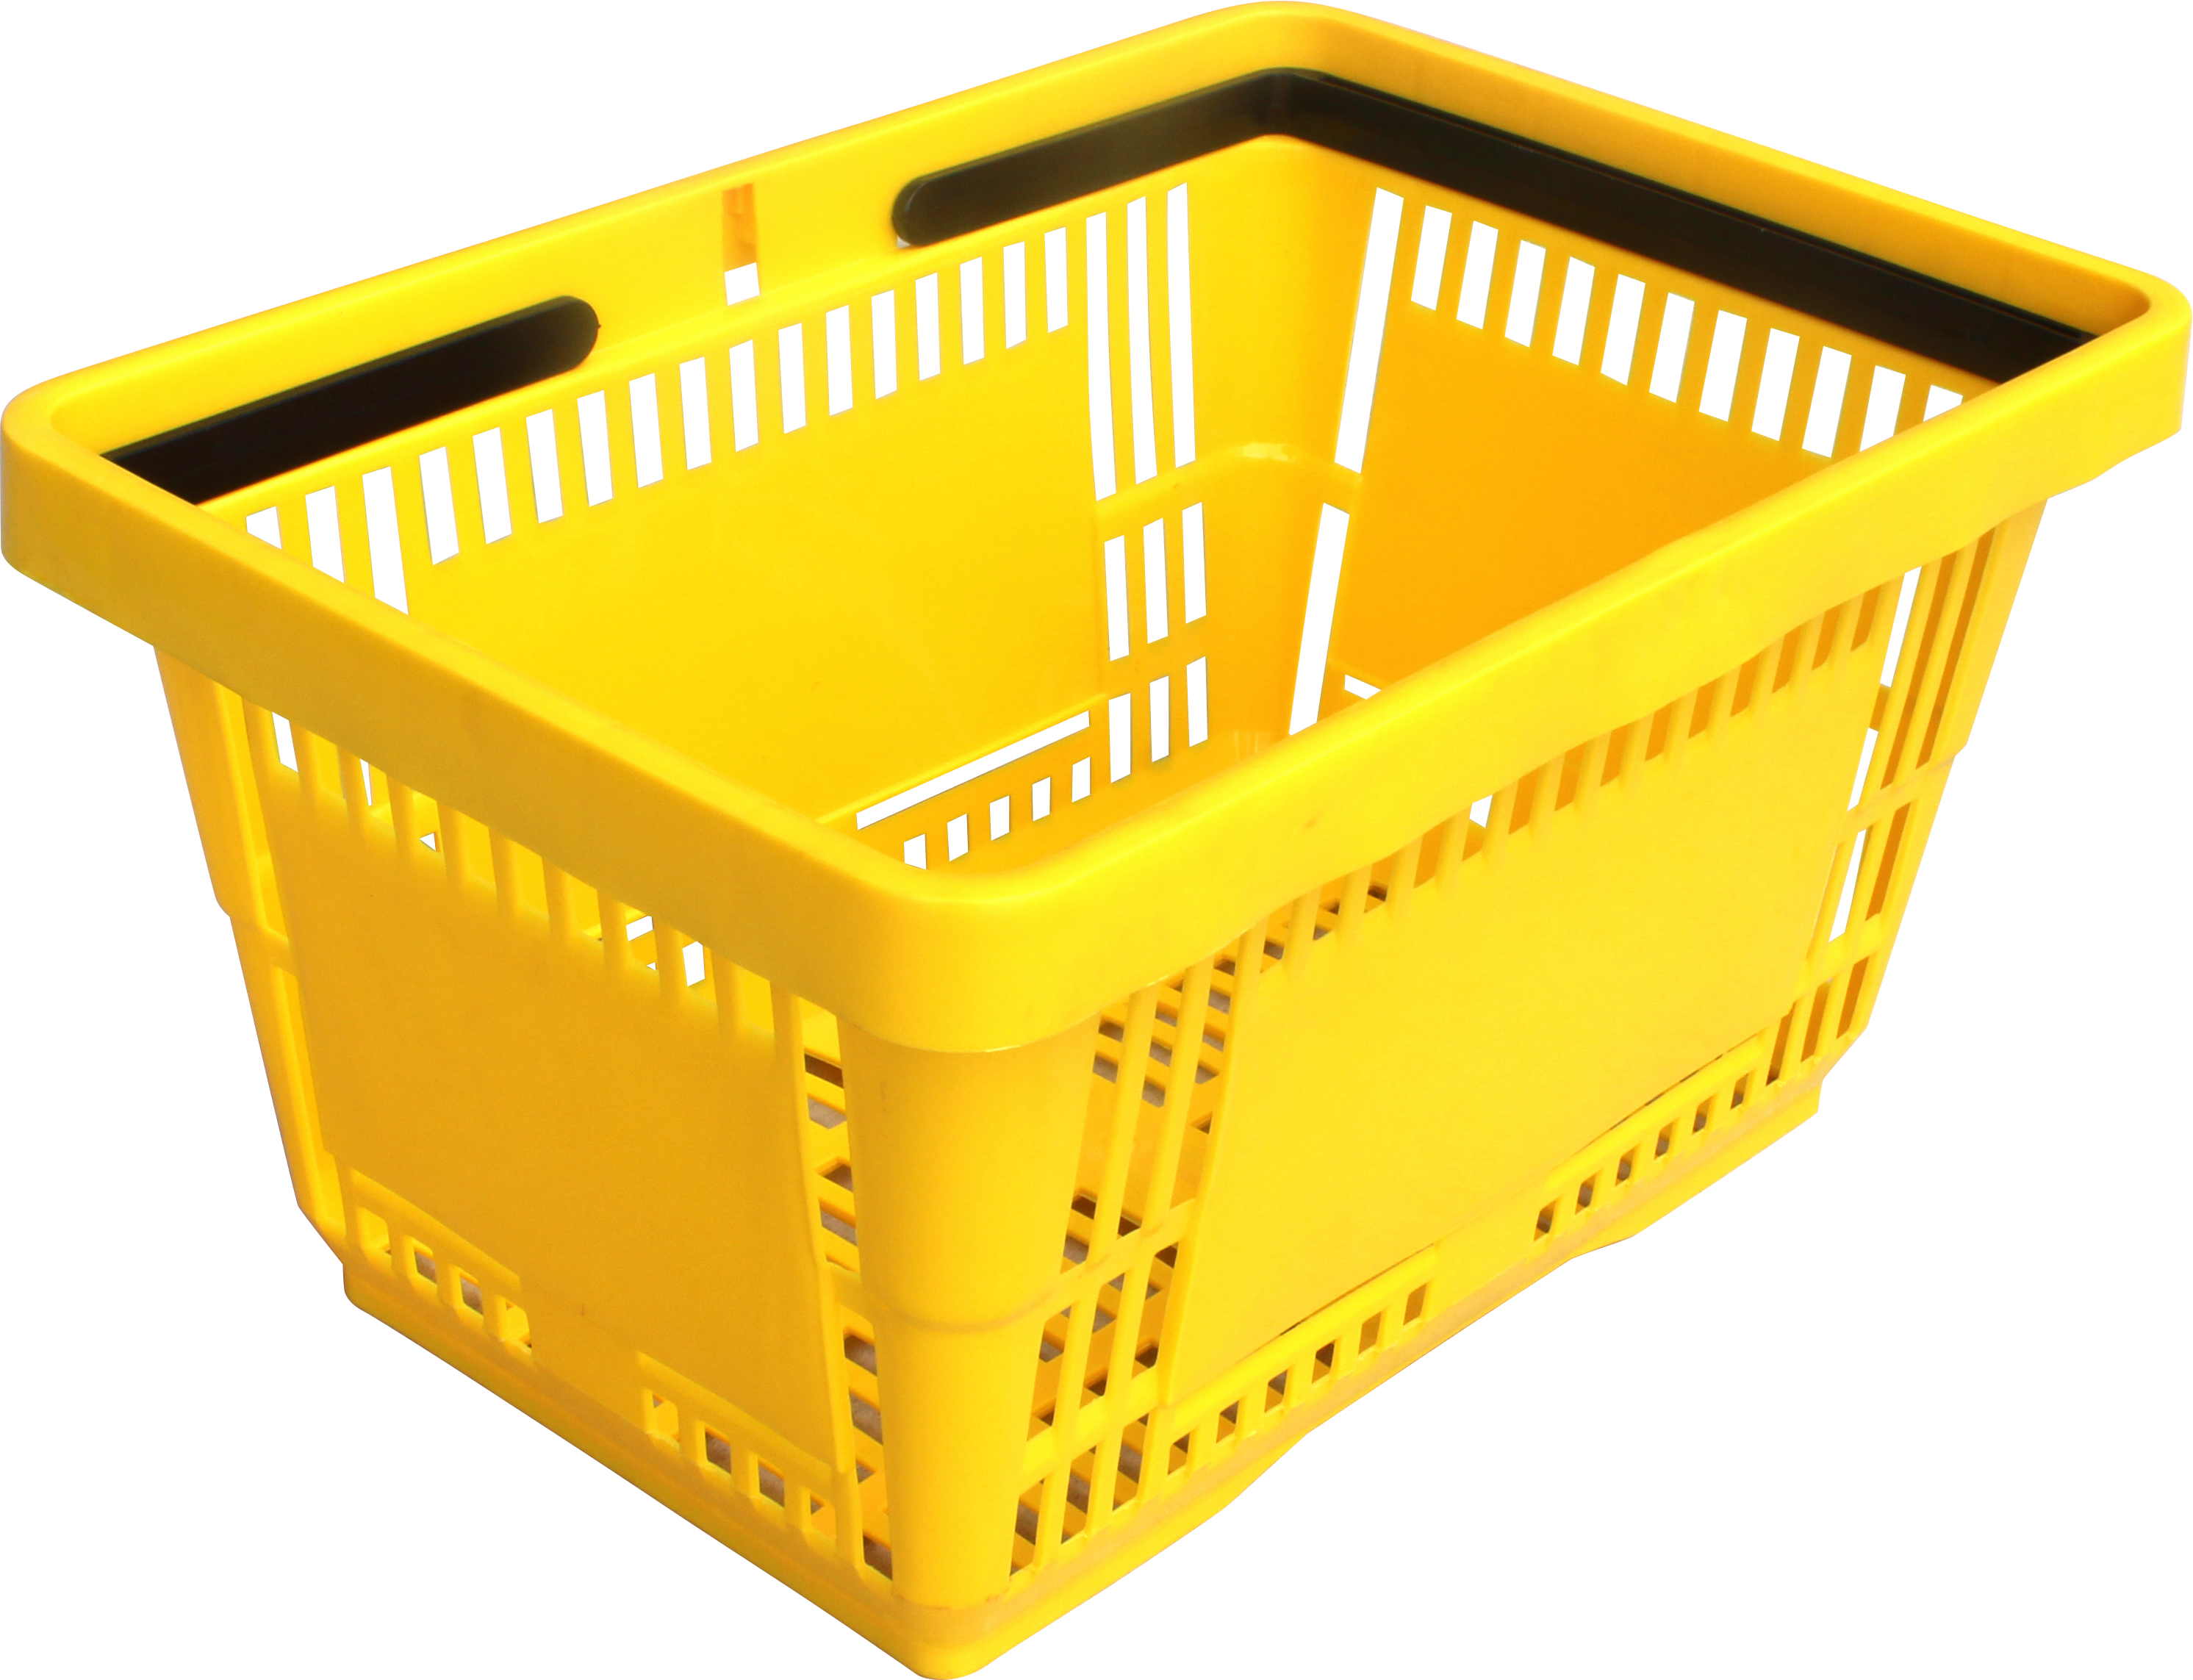 Buy Shopping Basket (Plastic) in Shopping Baskets from Astrolift NZ